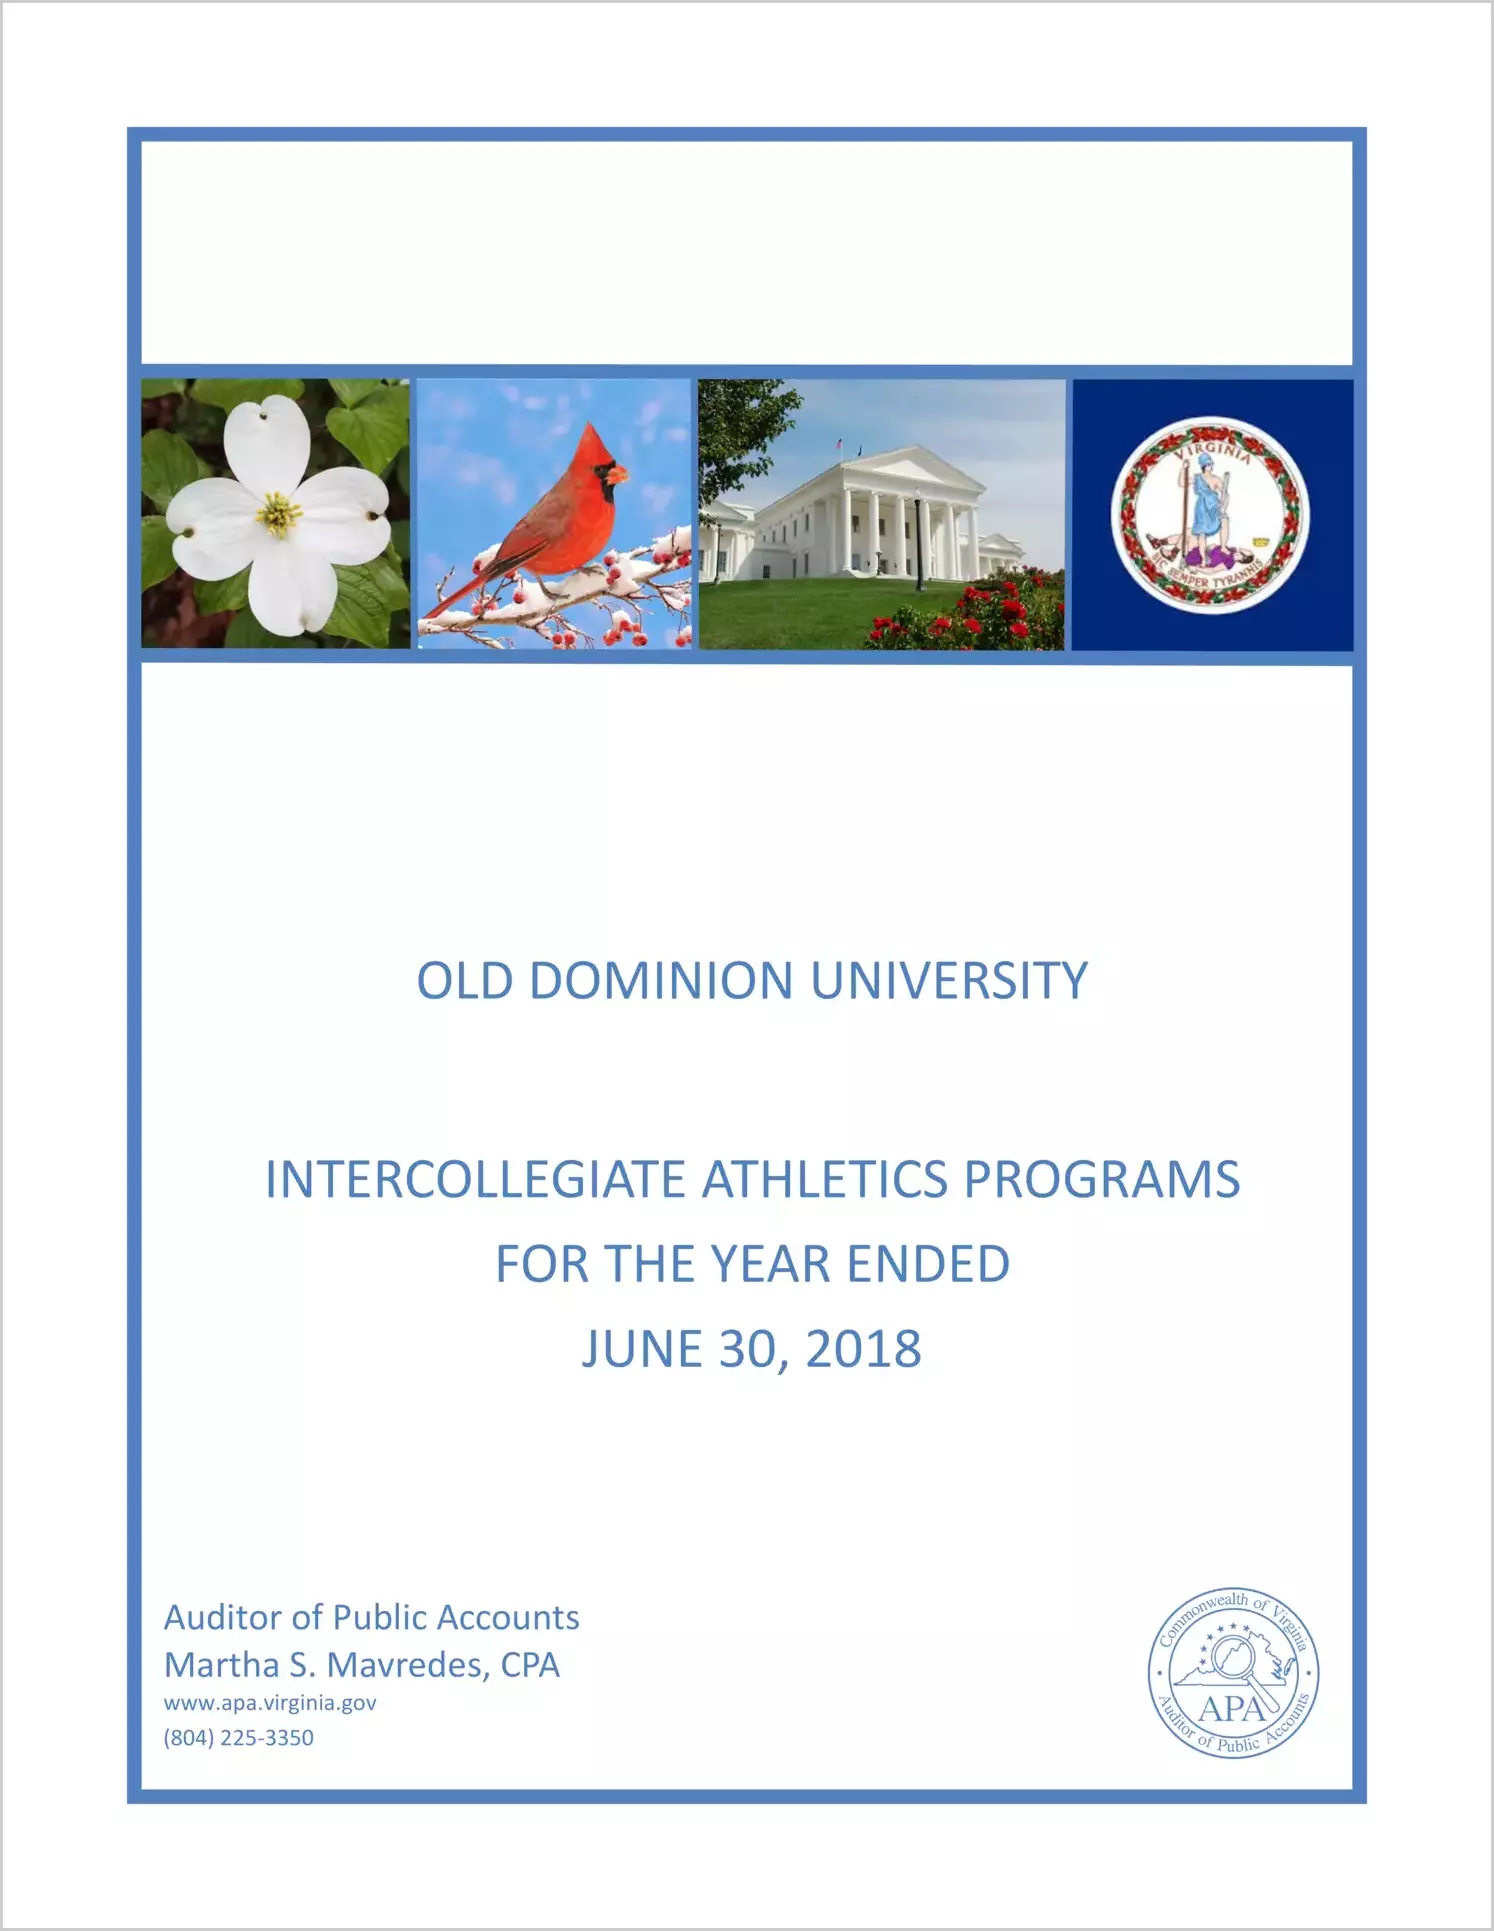 Old Dominion University Intercollegiate Athletics Programs for the year ended June 30, 2018